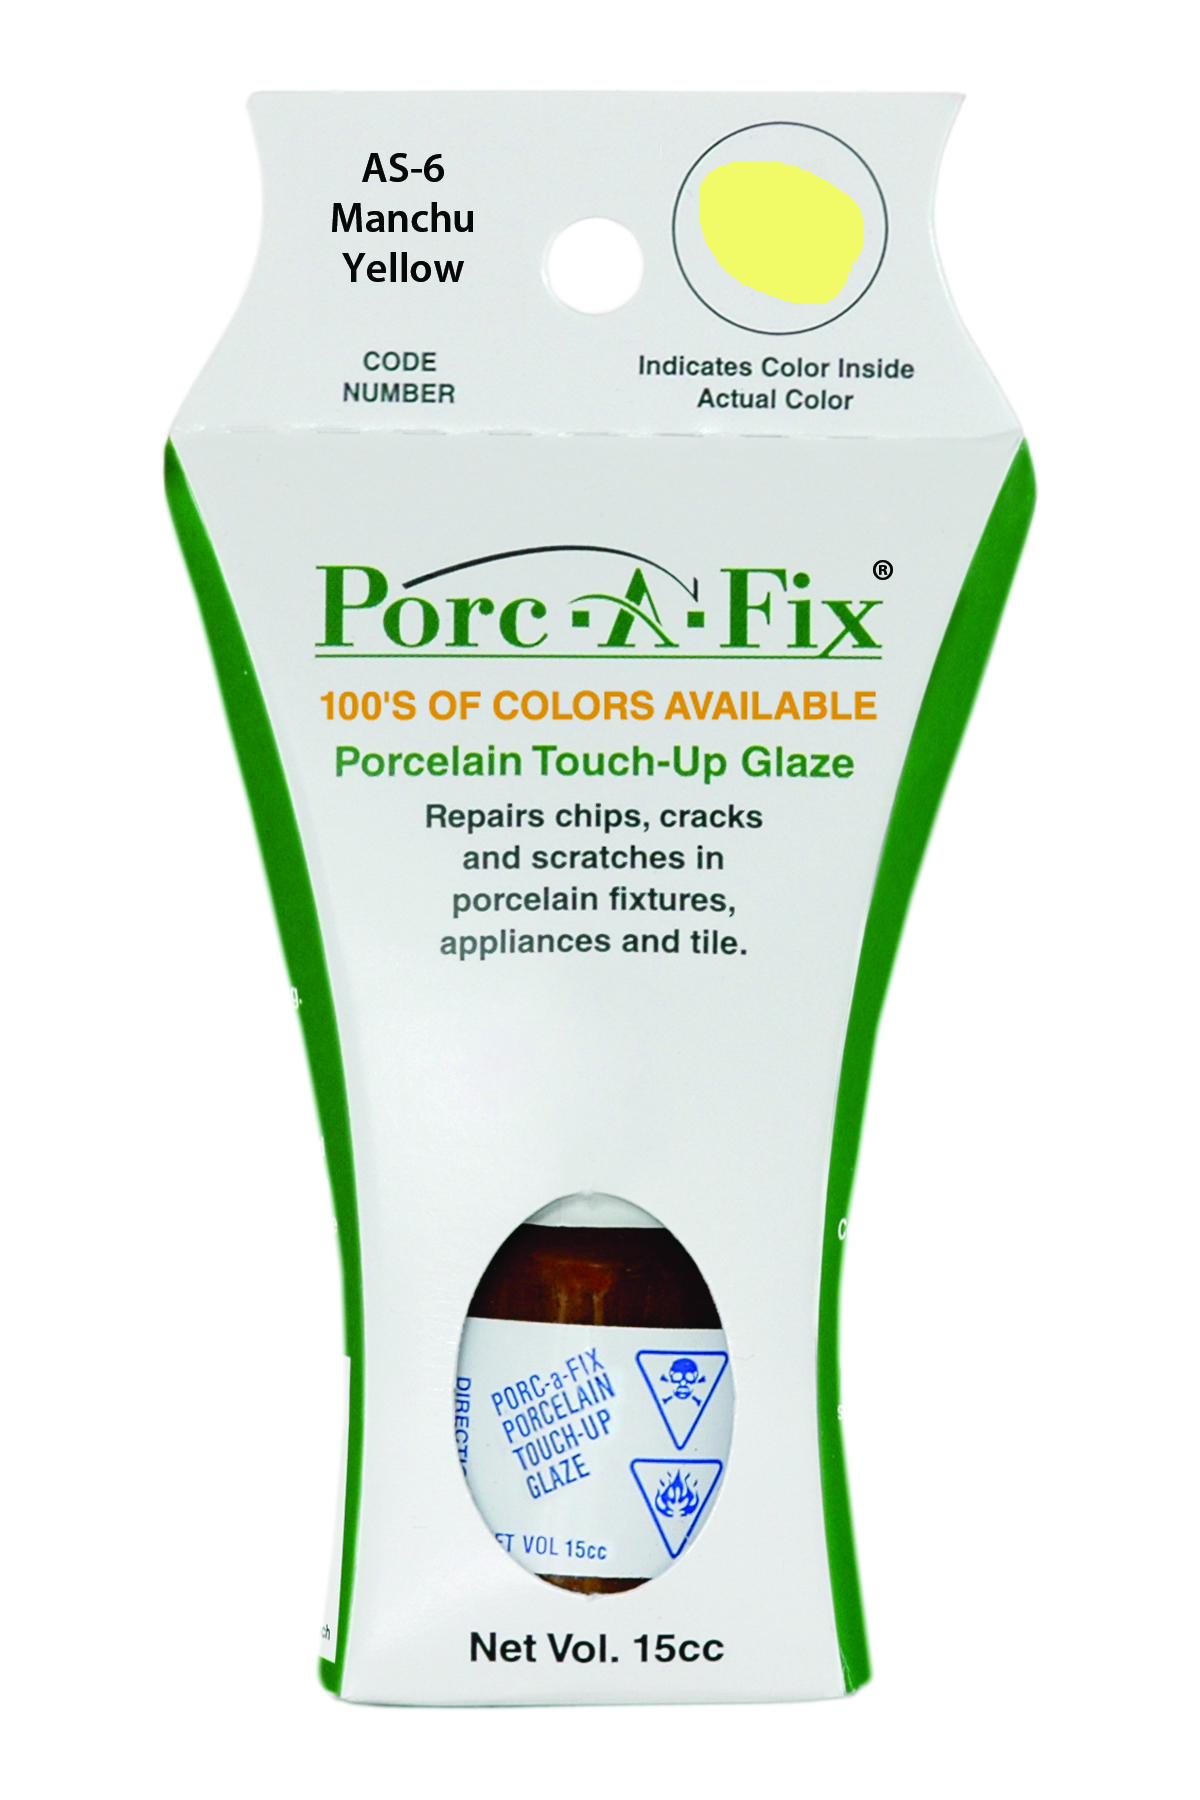 Fixture-Fix | AS-6 | Porc-A-Fix Touch-Up Glaze American Standard Manchu Yellow - Compatible with American Standard 070900-0350A Touch Up Paint Kit - MANCHU YELLOW